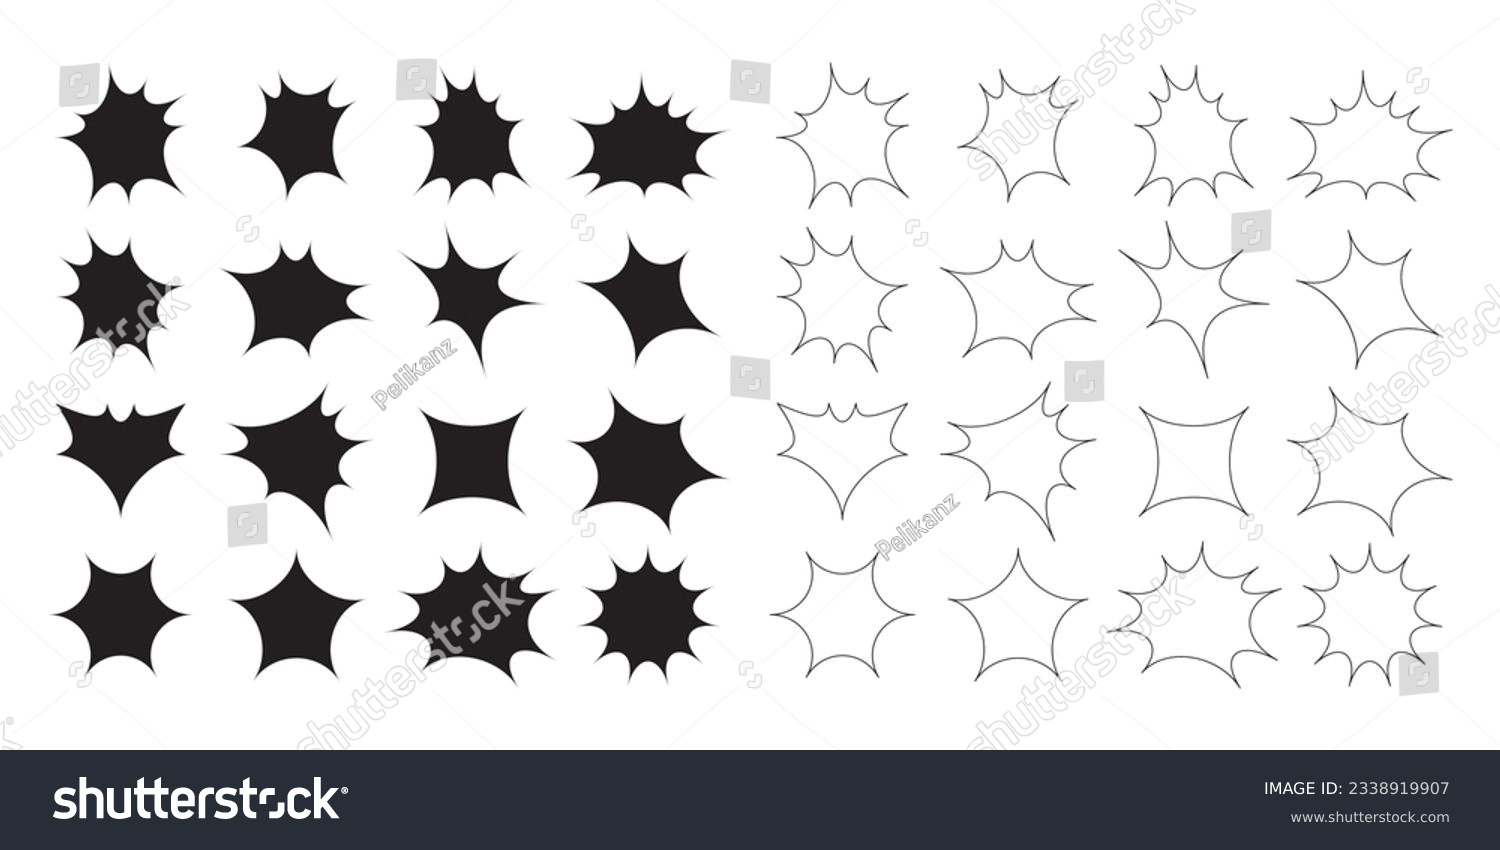 SVG of Black isolated silhouette and out line pointy distorted random shapes design elements template set on white background svg